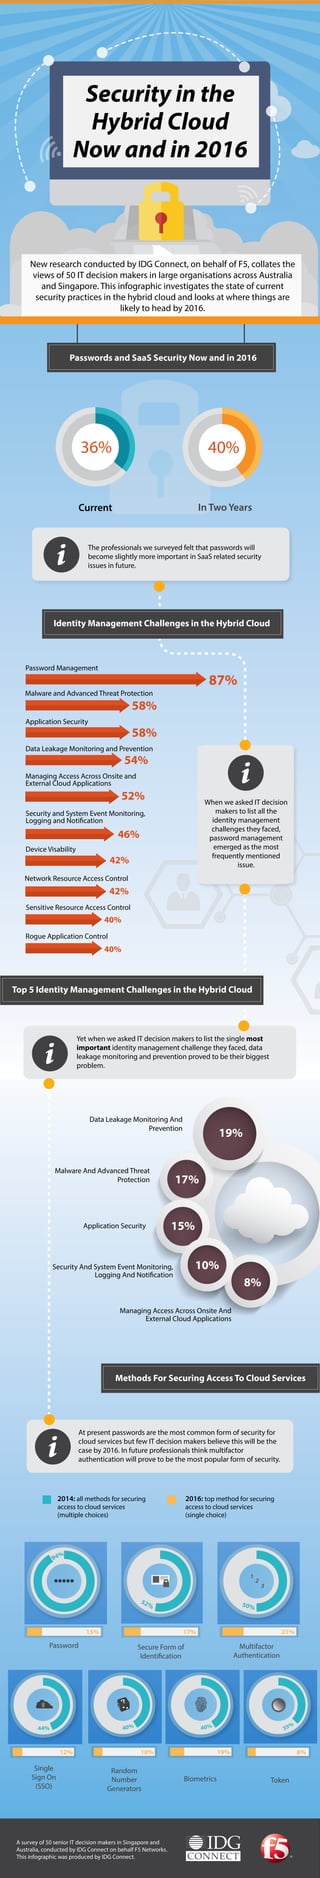 New research conducted by IDG Connect, on behalf of F5, collates the
views of 50 IT decision makers in large organisations across Australia
and Singapore. This infographic investigates the state of current
security practices in the hybrid cloud and looks at where things are
likely to head by 2016.
The professionals we surveyed felt that passwords will
become slightly more important in SaaS related security
issues in future.
Current In Two Years
Passwords and SaaS Security Now and in 2016
When we asked IT decision
makers to list all the
identity management
challenges they faced,
password management
emerged as the most
frequently mentioned
issue.
Password Management
Malware and Advanced Threat Protection
Application Security
Data Leakage Monitoring and Prevention
Managing Access Across Onsite and
External Cloud Applications
Security and System Event Monitoring,
Logging and Notification
Device Visability
Network Resource Access Control
Sensitive Resource Access Control
Rogue Application Control
87%
58%
58%
54%
52%
46%
42%
42%
40%
40%
Data Leakage Monitoring And
Prevention
Application Security
Managing Access Across Onsite And
External Cloud Applications
Security And System Event Monitoring,
Logging And Notification
At present passwords are the most common form of security for
cloud services but few IT decision makers believe this will be the
case by 2016. In future professionals think multifactor
authentication will prove to be the most popular form of security.
A survey of 50 senior IT decision makers in Singapore and
Australia, conducted by IDG Connect on behalf F5 Networks.
This infographic was produced by IDG Connect.
Yet when we asked IT decision makers to list the single most
important identity management challenge they faced, data
leakage monitoring and prevention proved to be their biggest
problem.
19%
17%
15%
10%
8%
Identity Management Challenges in the Hybrid Cloud
Malware And Advanced Threat
Protection
Top 5 Identity Management Challenges in the Hybrid Cloud
Methods For Securing Access To Cloud Services
Password Secure Form of
Identification
Multifactor
Authentication
Single
Sign On
(SSO)
Random
Number
Generators
Biometrics Token
2014: all methods for securing
access to cloud services
(multiple choices)
2016: top method for securing
access to cloud services
(single choice)
36% 40%
Security in the
Hybrid Cloud
Now and in 2016
94%
50%
35%40%44%
15% 17% 21%
12% 10% 19% 8%
*****
1
2
3
52%
40%
 